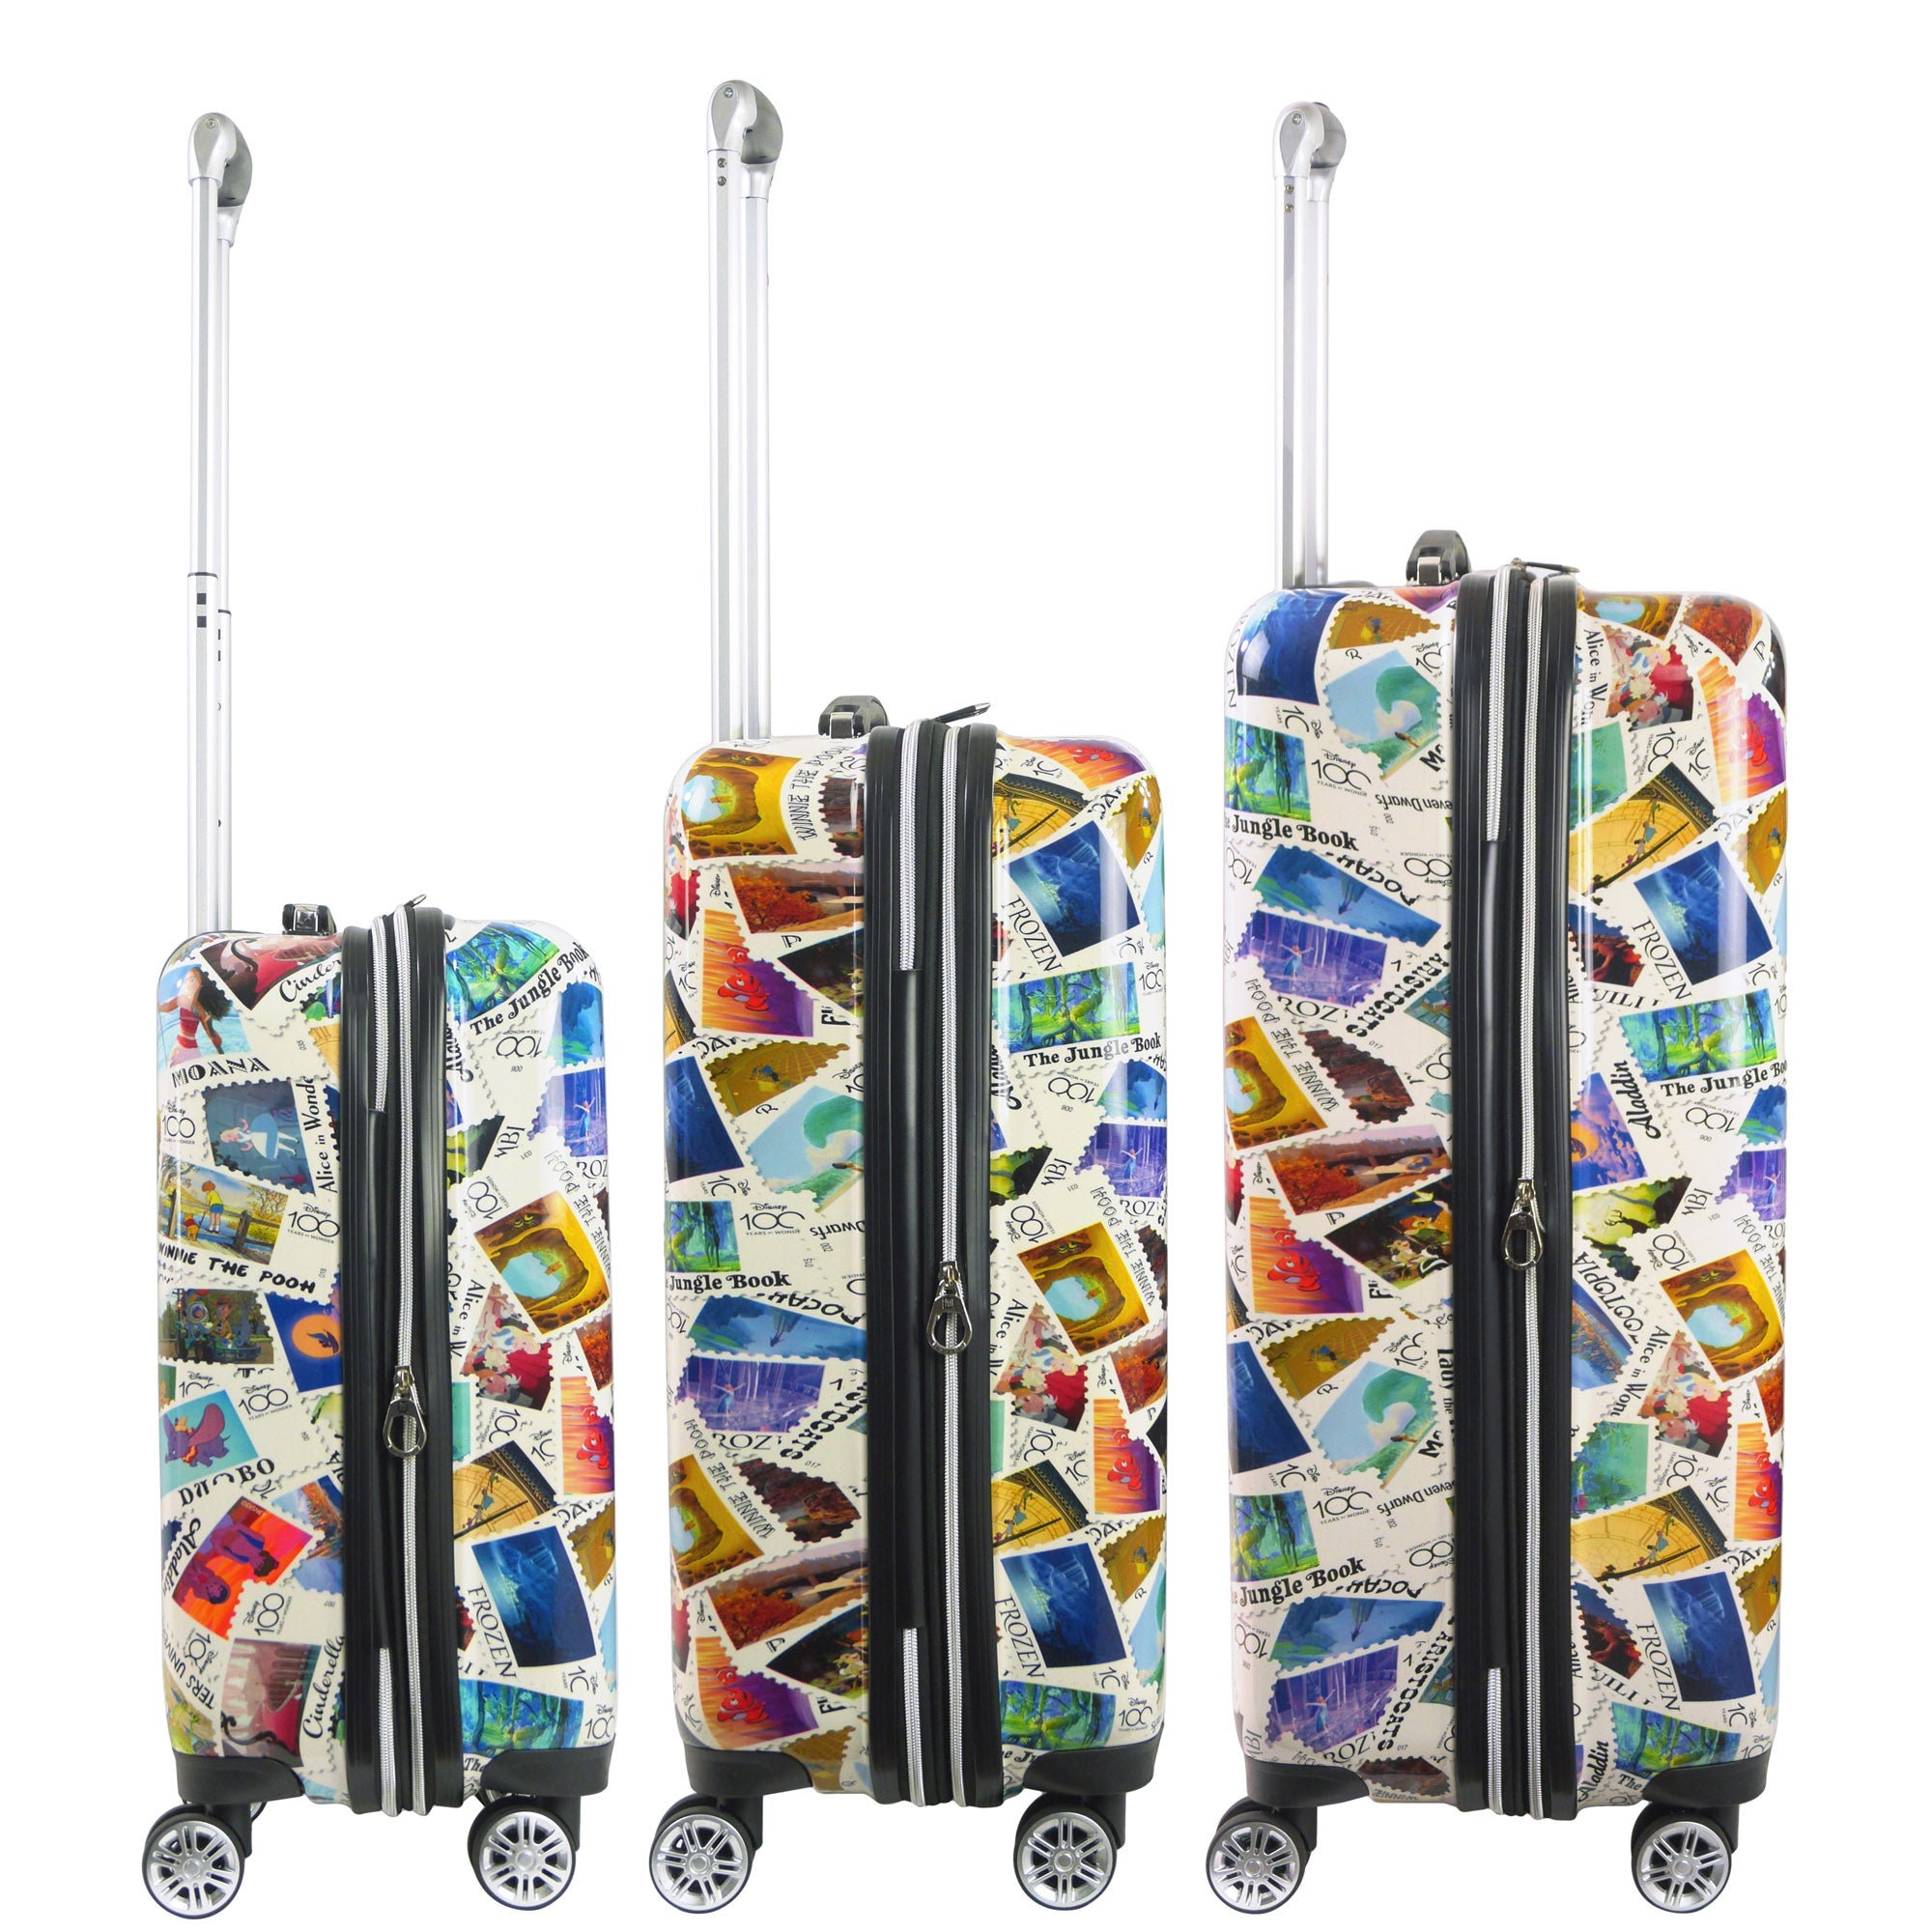 Disney Ful 100 Years Stamps 3 Piece Hardside Spinner Luggage Set